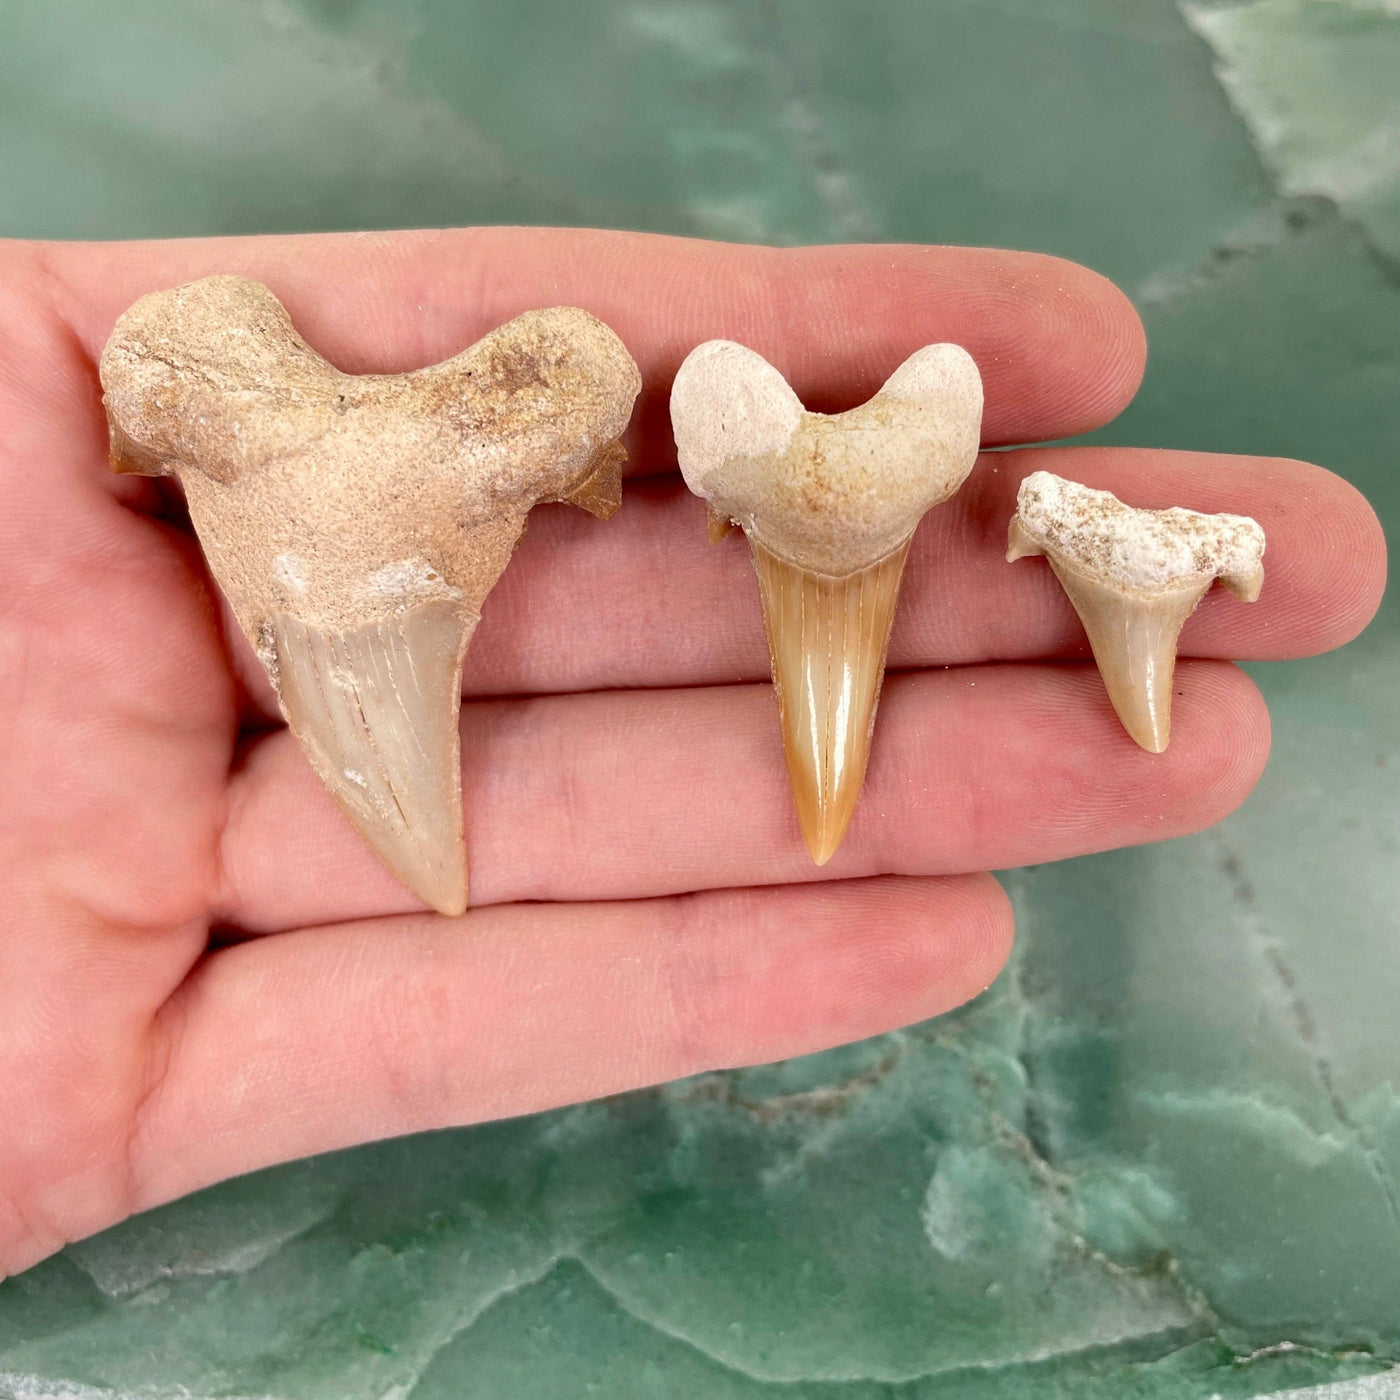 one of each fossilized shark tooth sizes in hand for size comparison